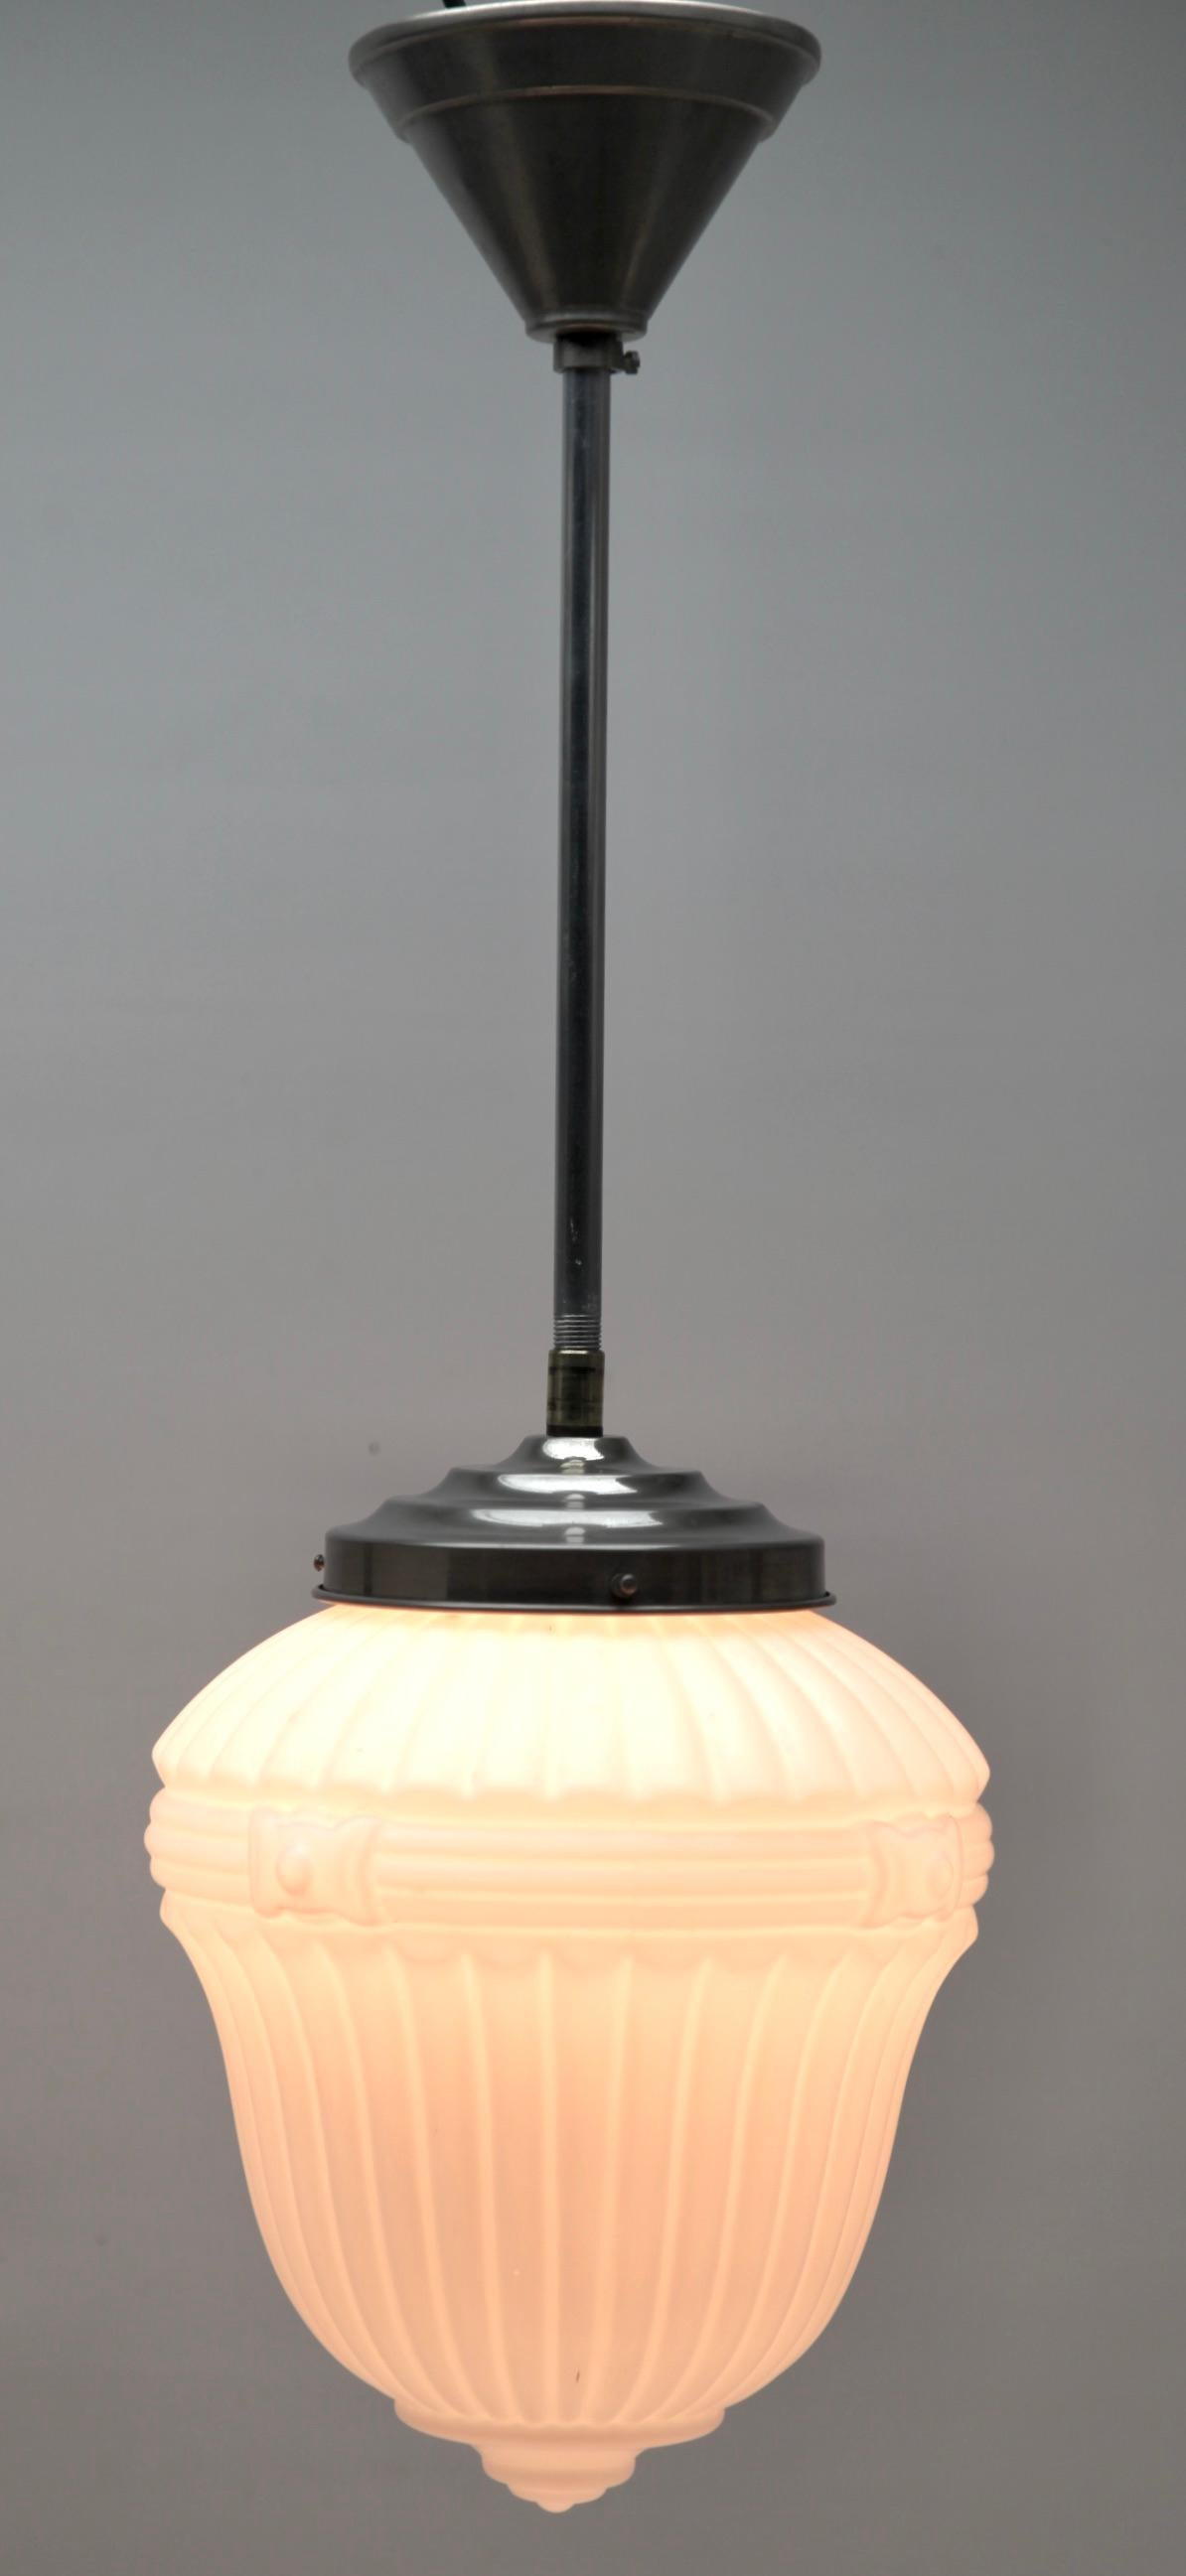 Scailmont Pendant Lamp with a Opaline Shade and Chrome Fittings, 1930s, Belgium For Sale 1